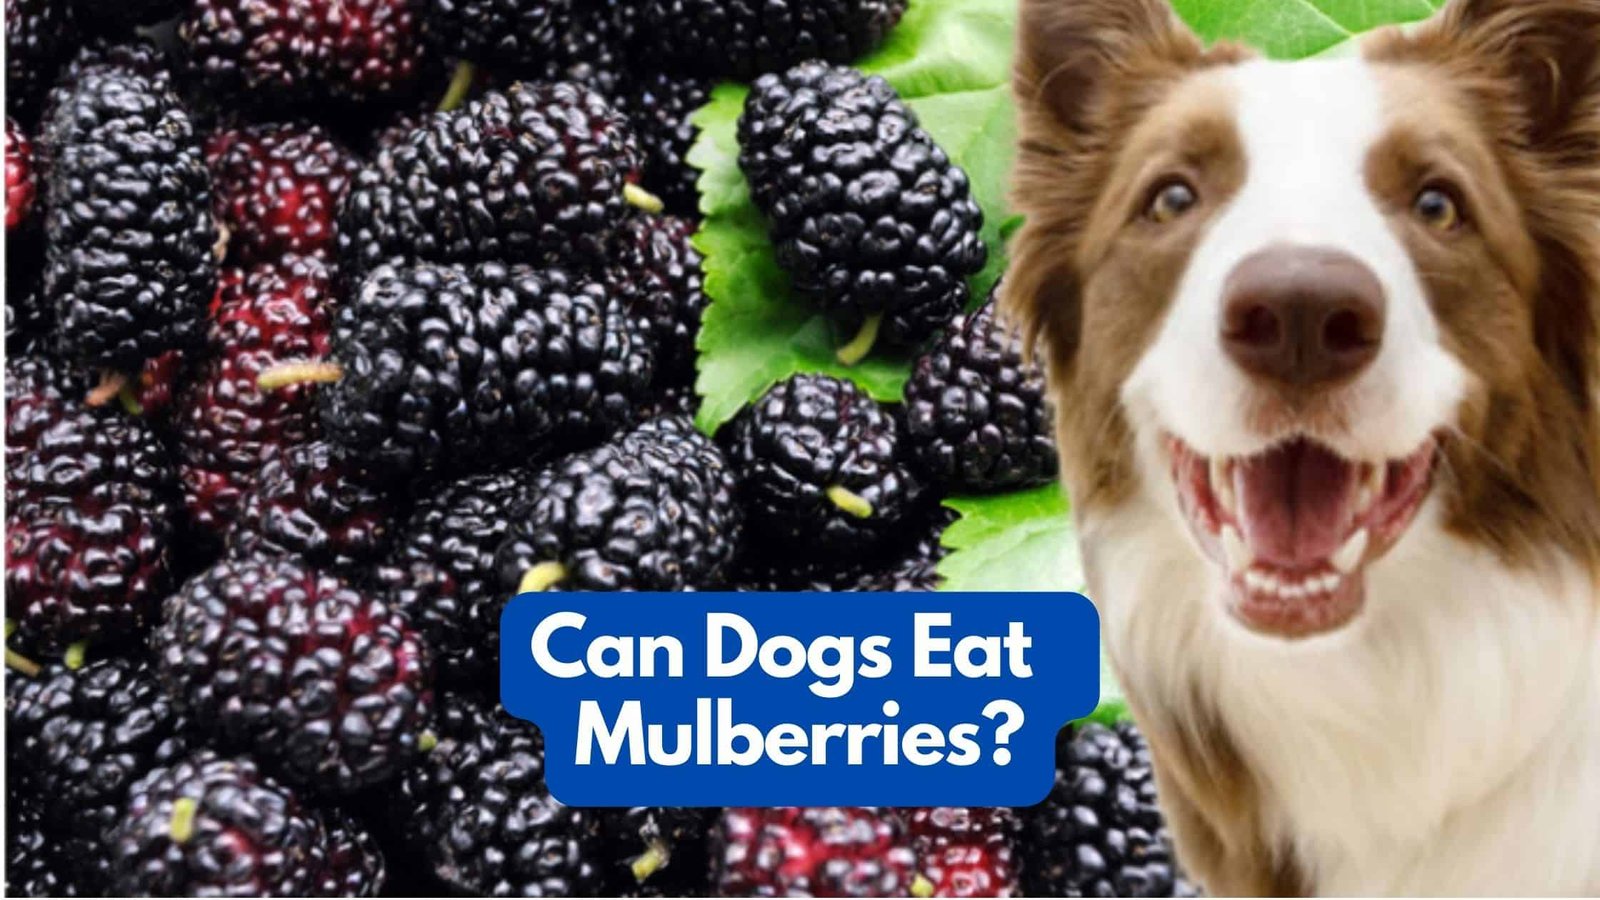 Can my dog eat mulberries